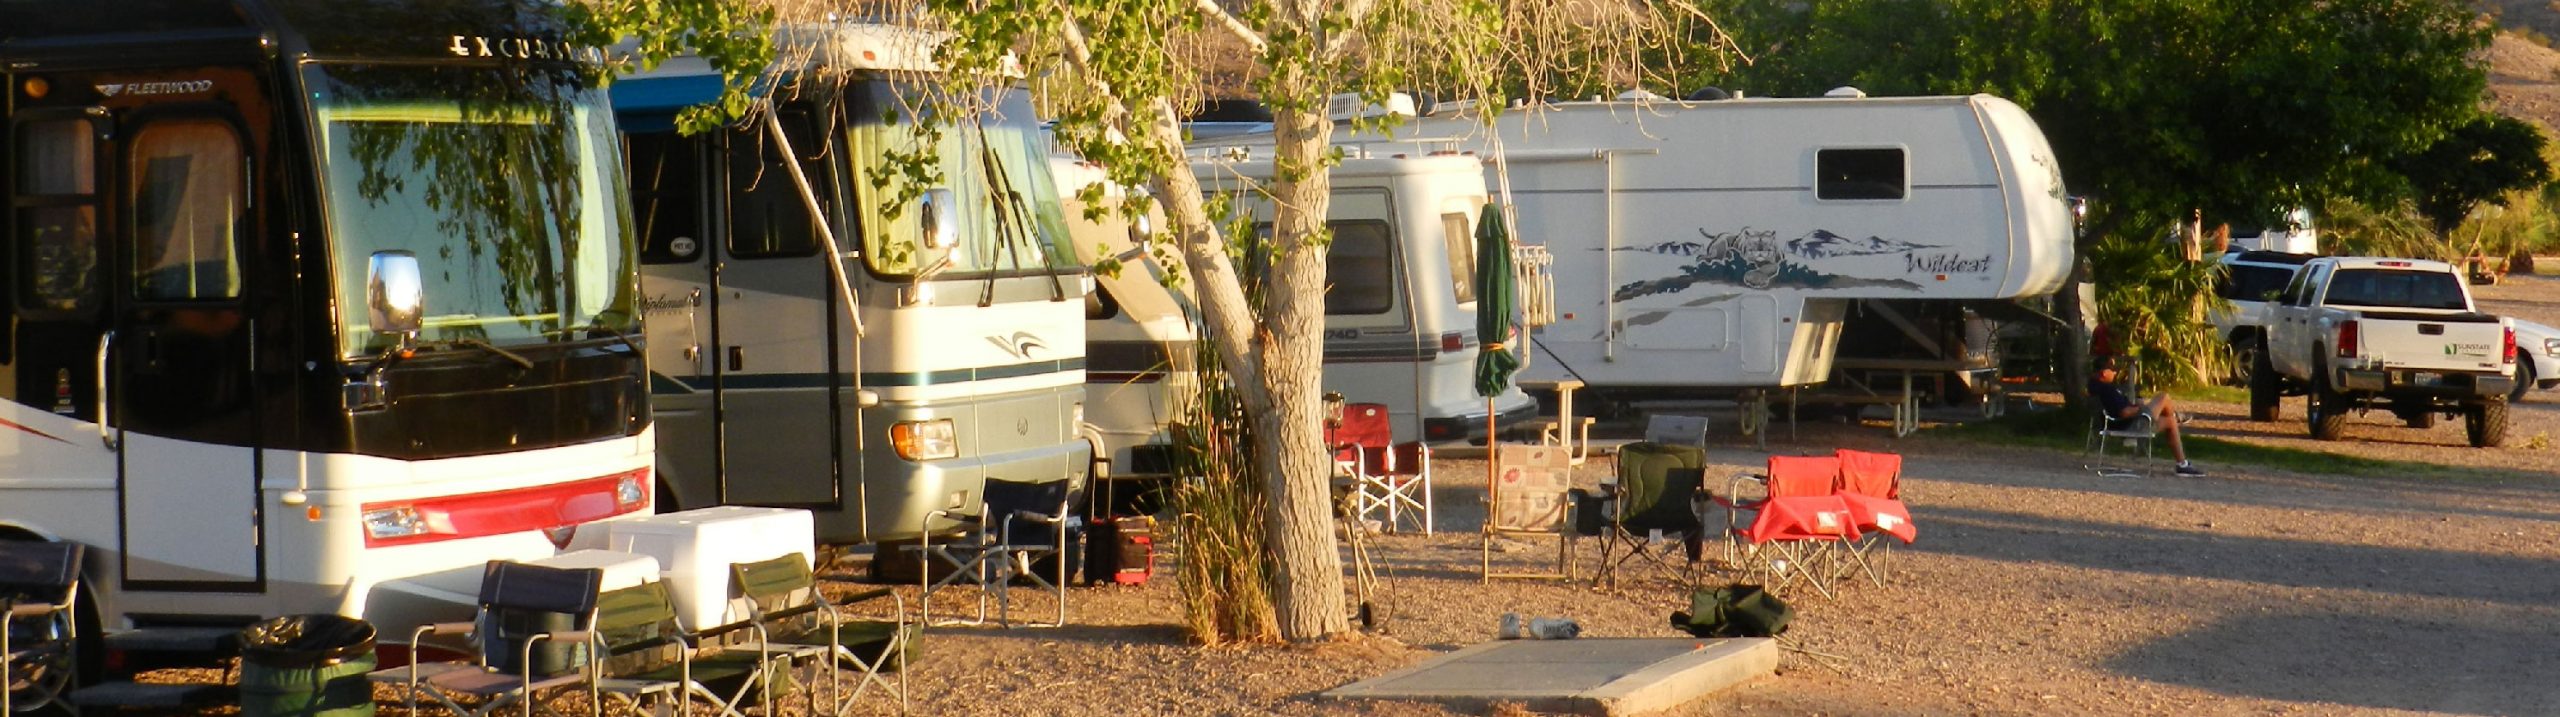 rv and campers in rv park